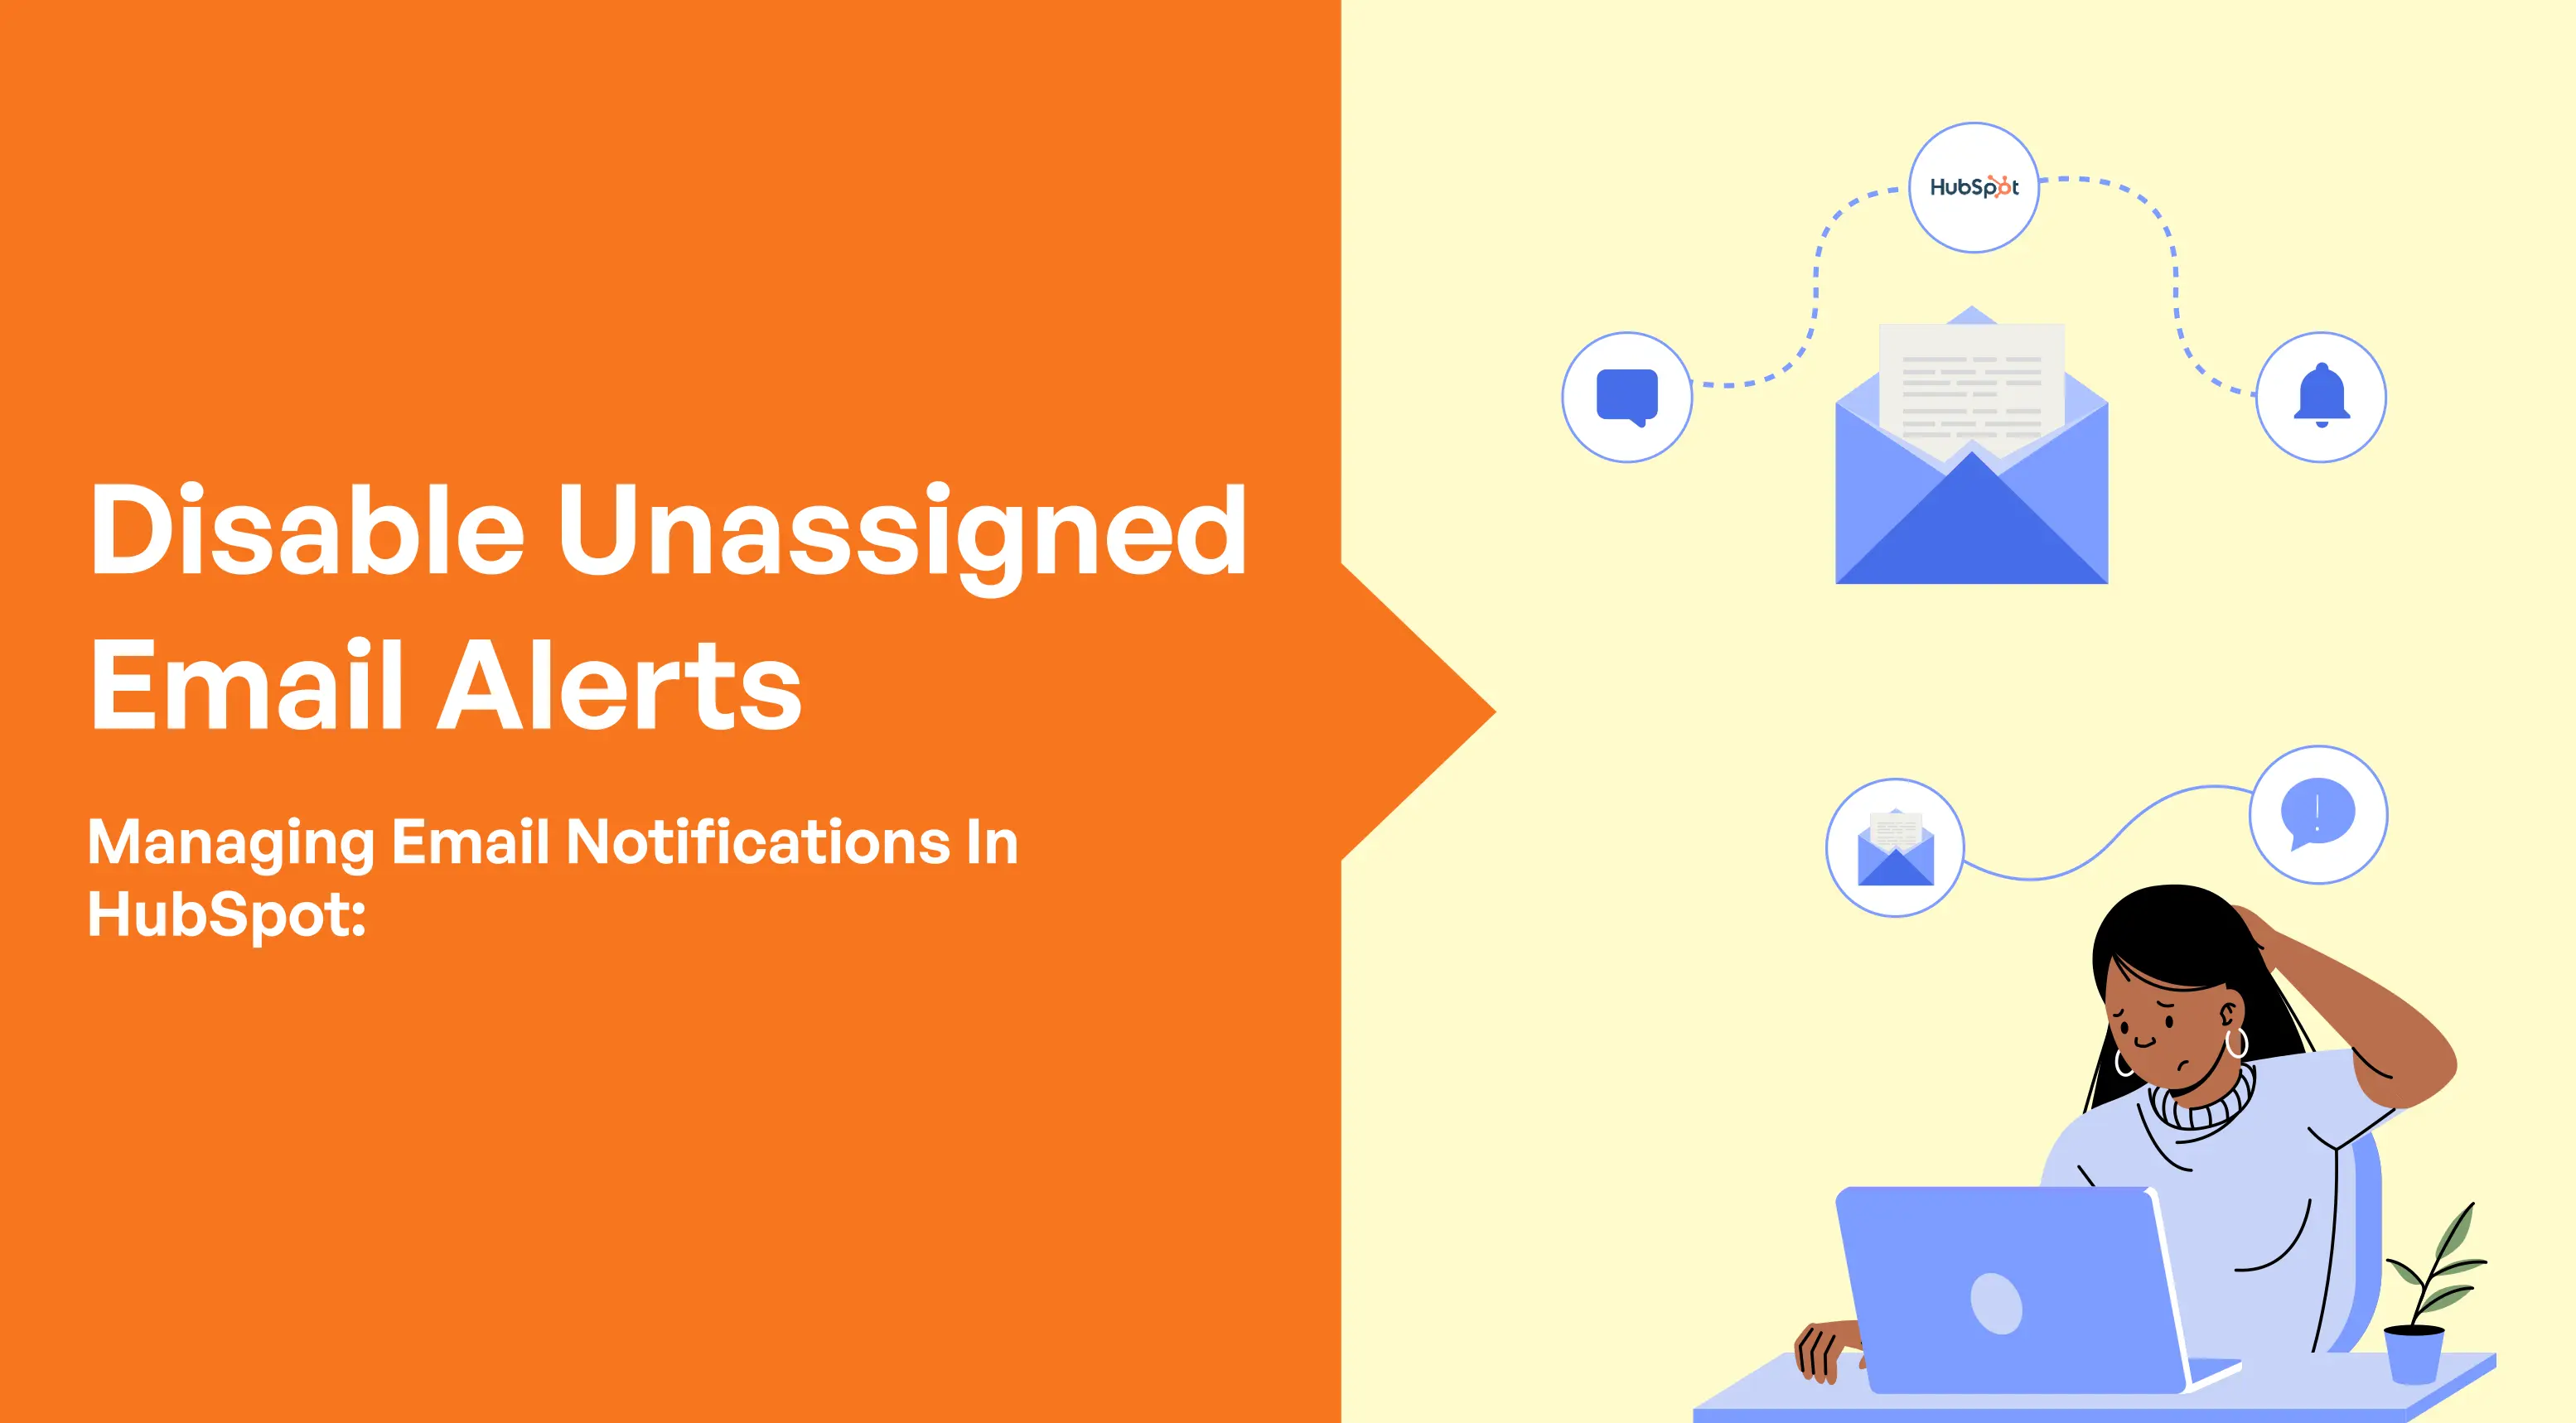 Managing Email Notifications in HubSpot: Disable Unassigned Email Alerts